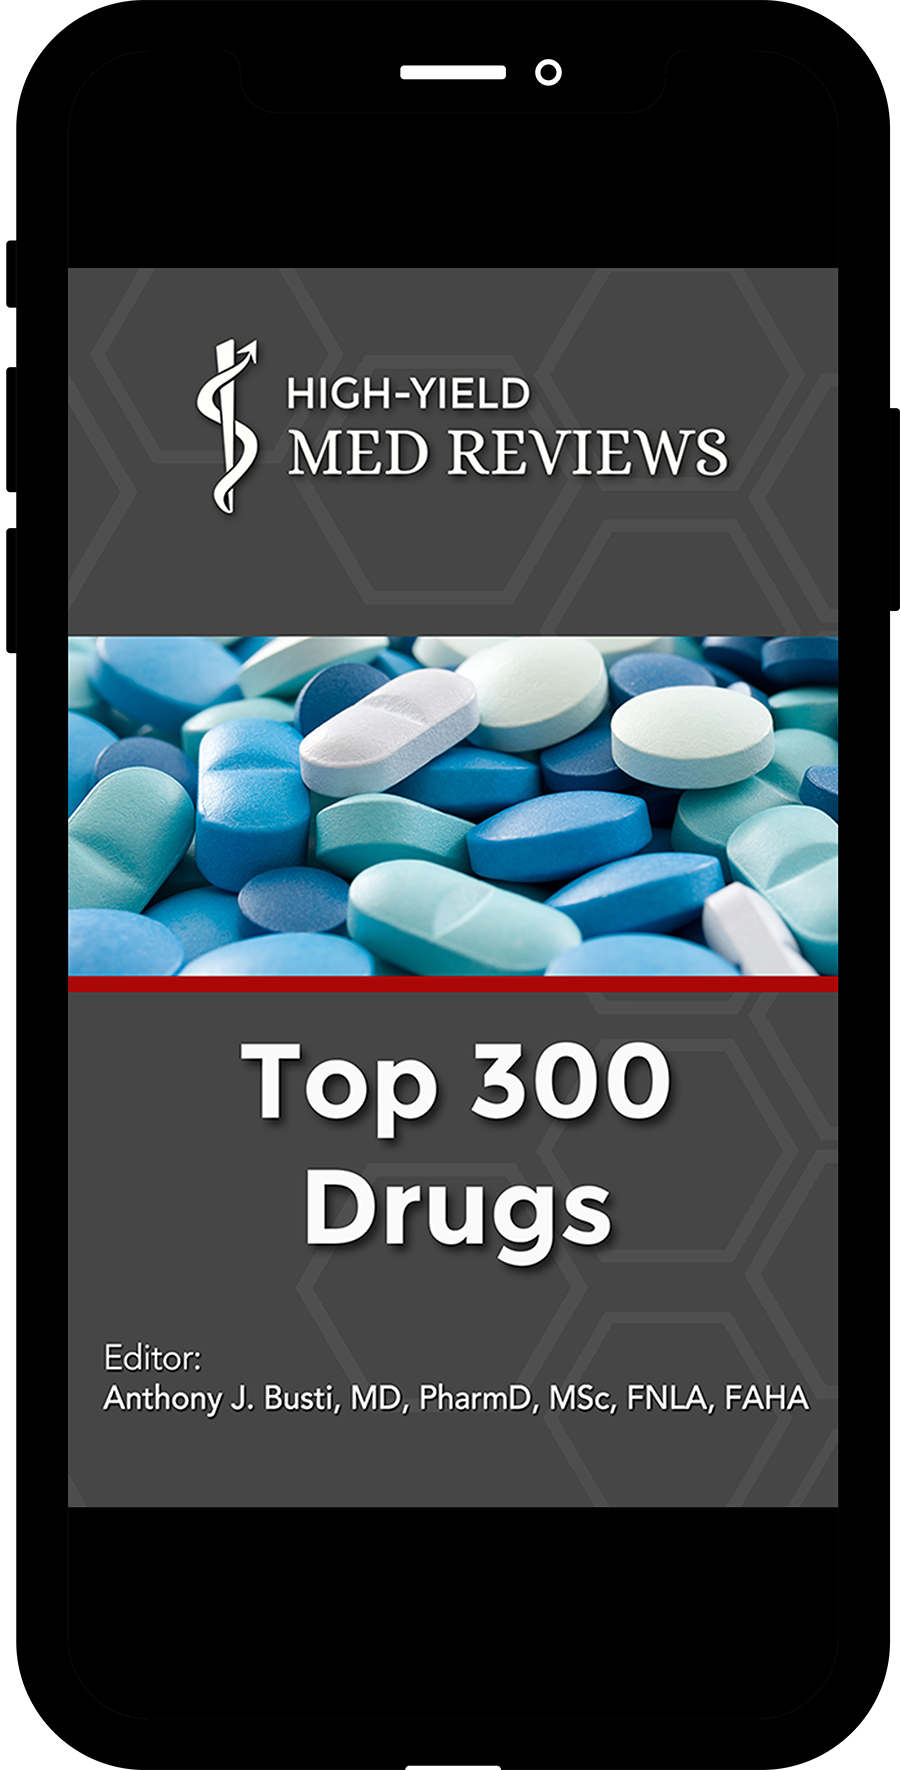 TOP-300-Drugs-BookCover-iPhoneX.png